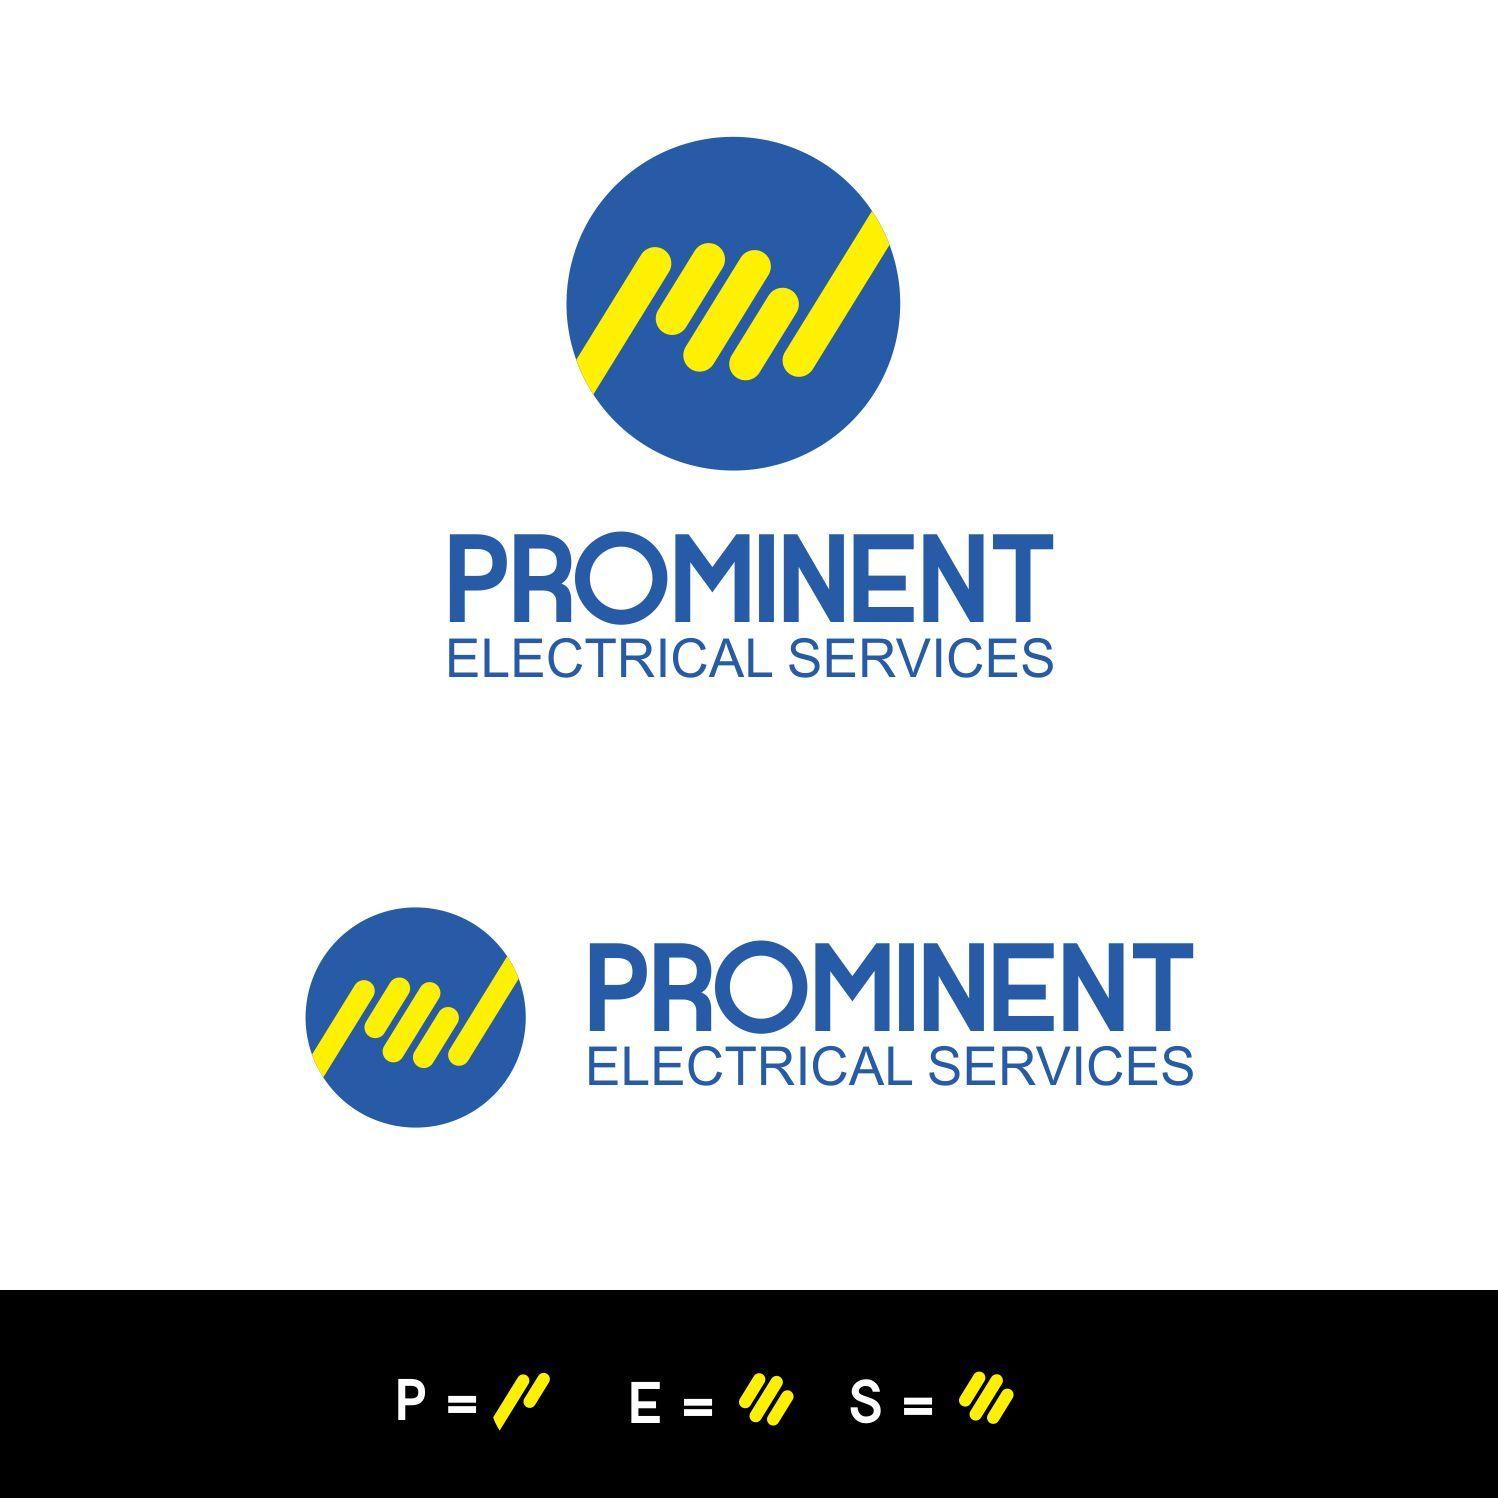 Prominent S Logo - Masculine, Upmarket, Electrical Logo Design for Prominent Electrical ...